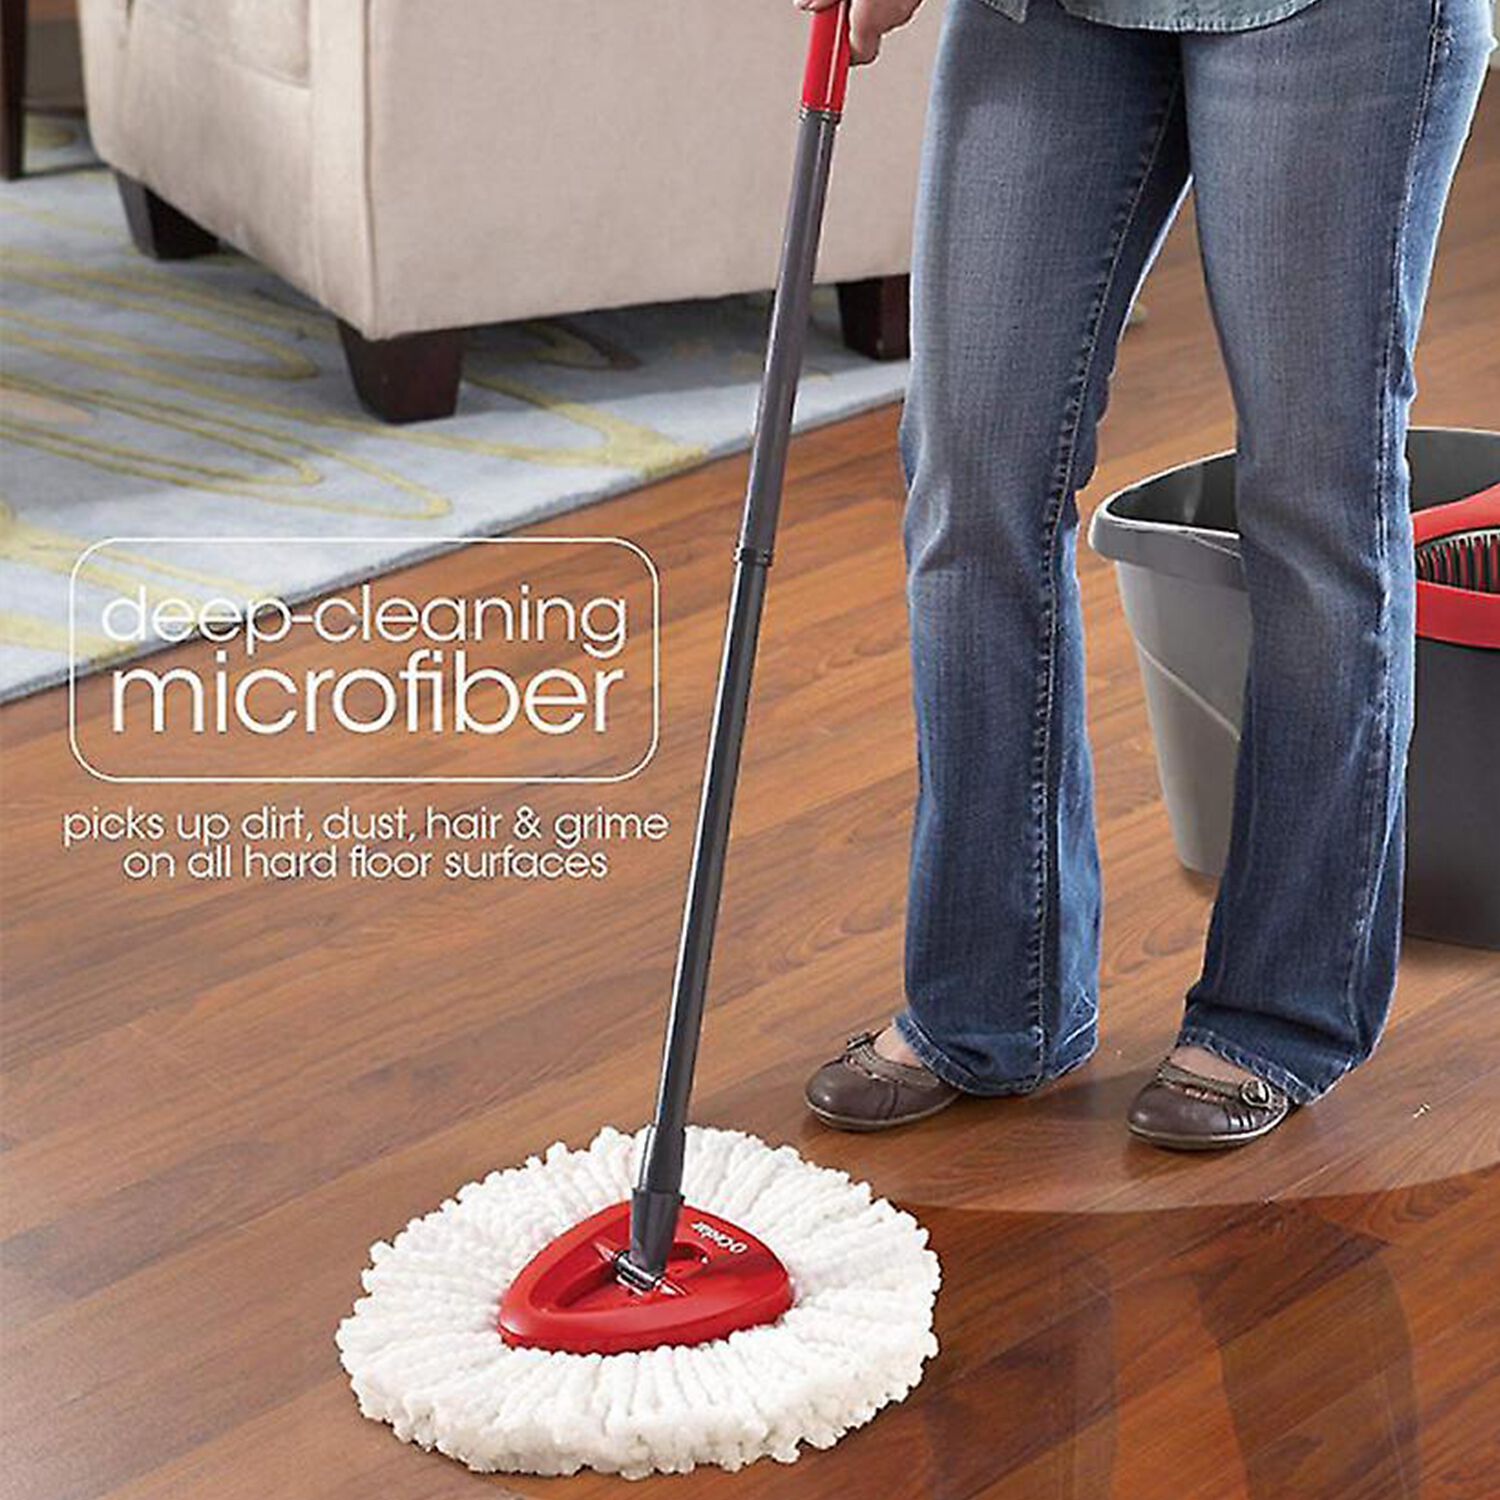 Vileda Spin and Clean Floor Mop and Bucket Set, Brand New Boxed Fast  Delivery